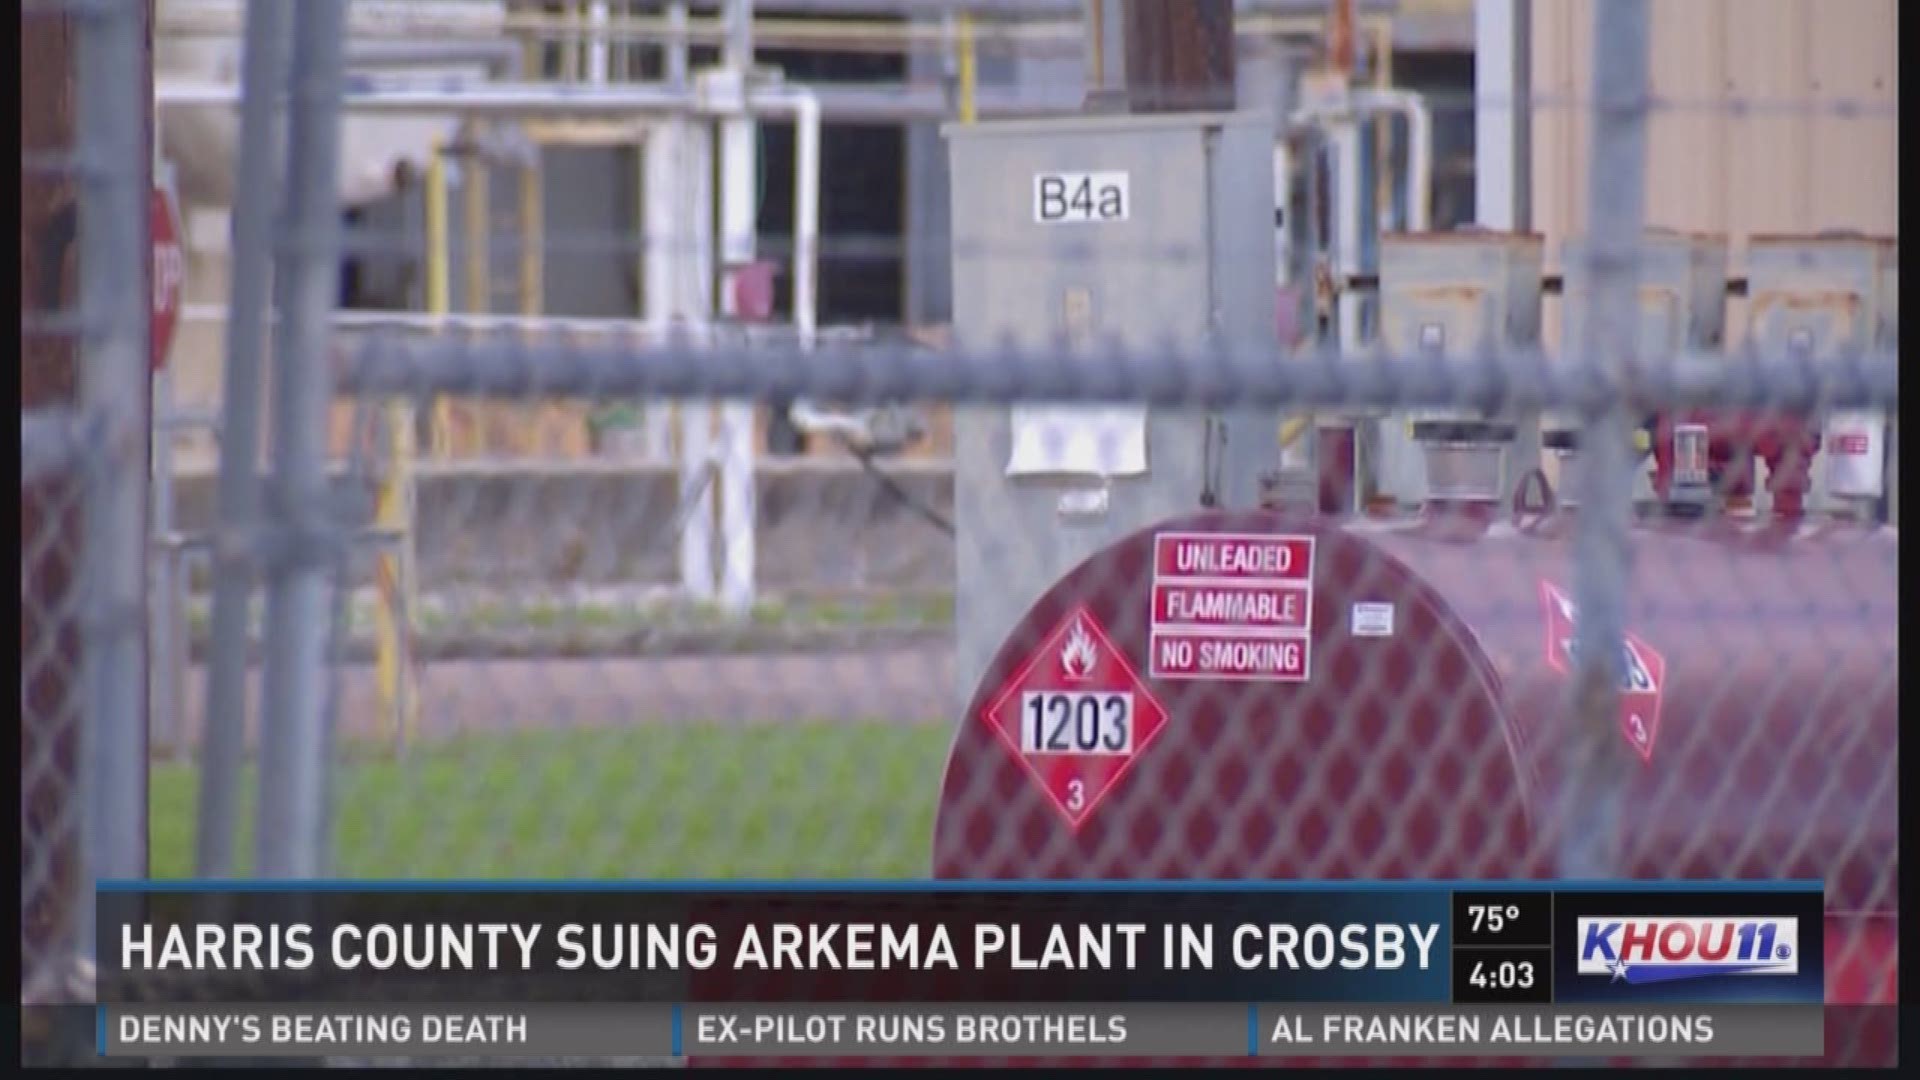 A Harris County attorney is suing Arkema, Inc., claiming it released toxic chemicals following a fire at the plant in August.